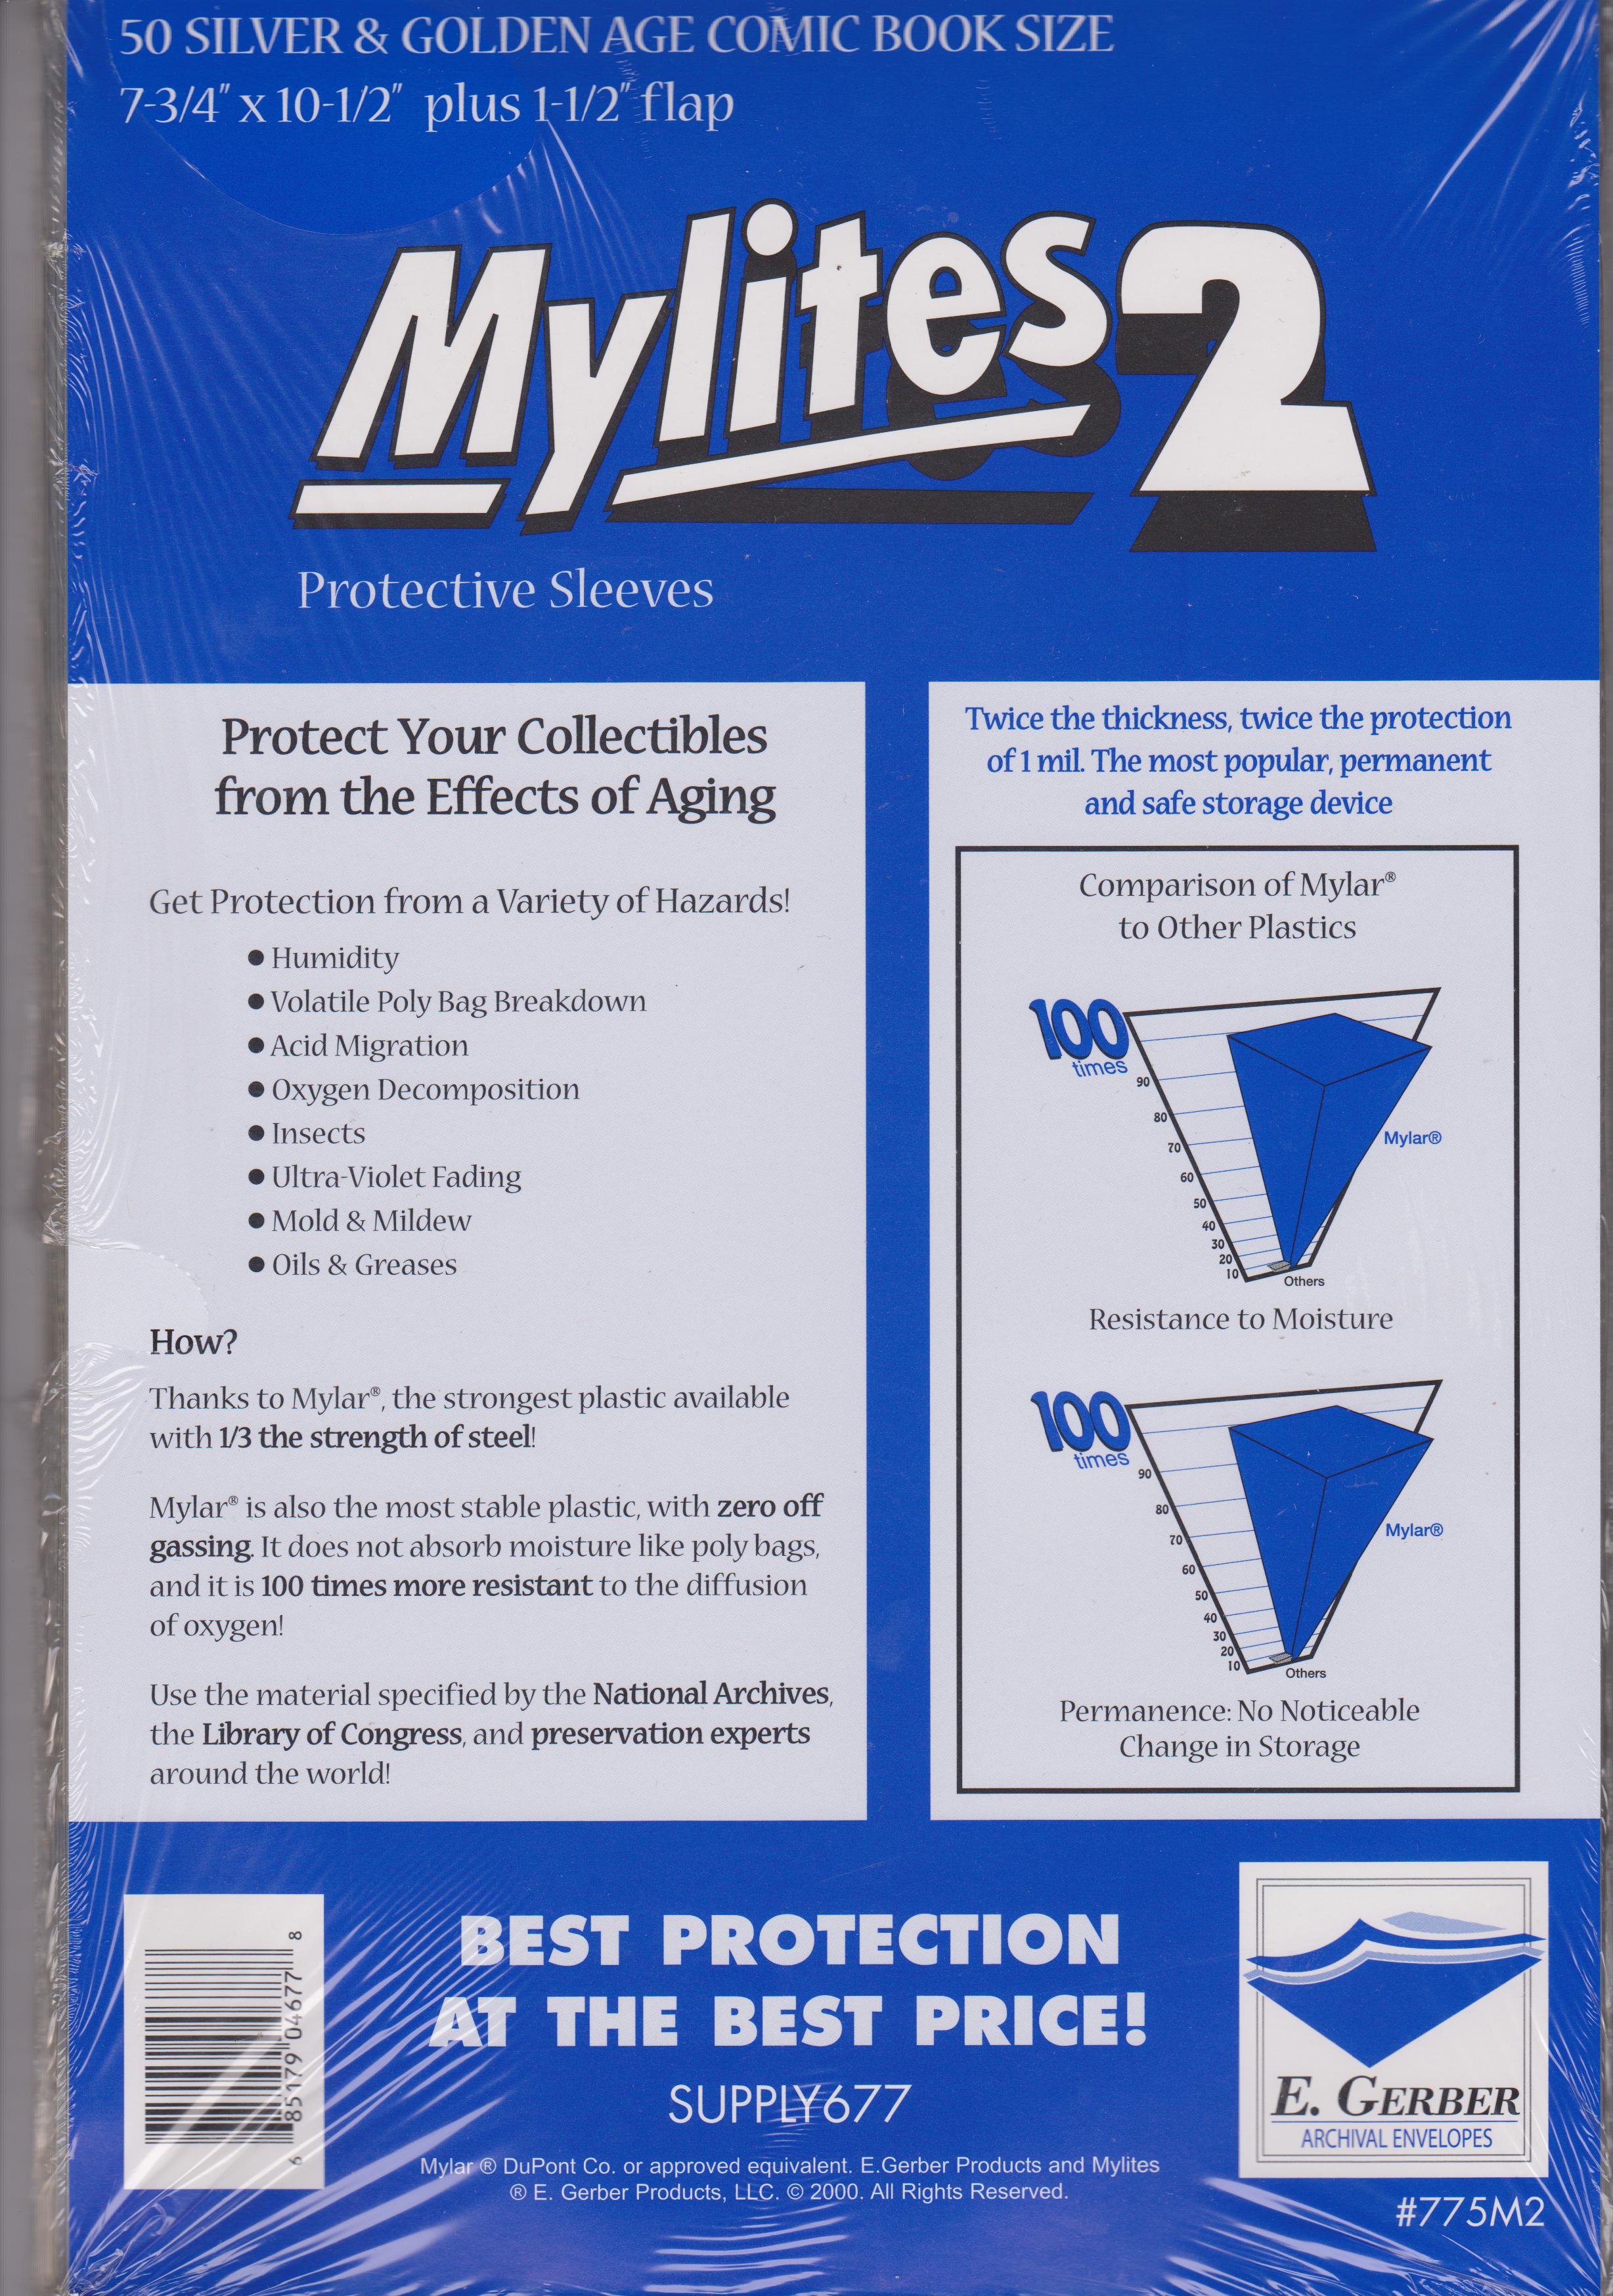 E GERBER MYLITES 2 "PROTECTIVE SLEEVES" PACK OF 50 SILVER/GOLDEN AGE COMIC SIZE 